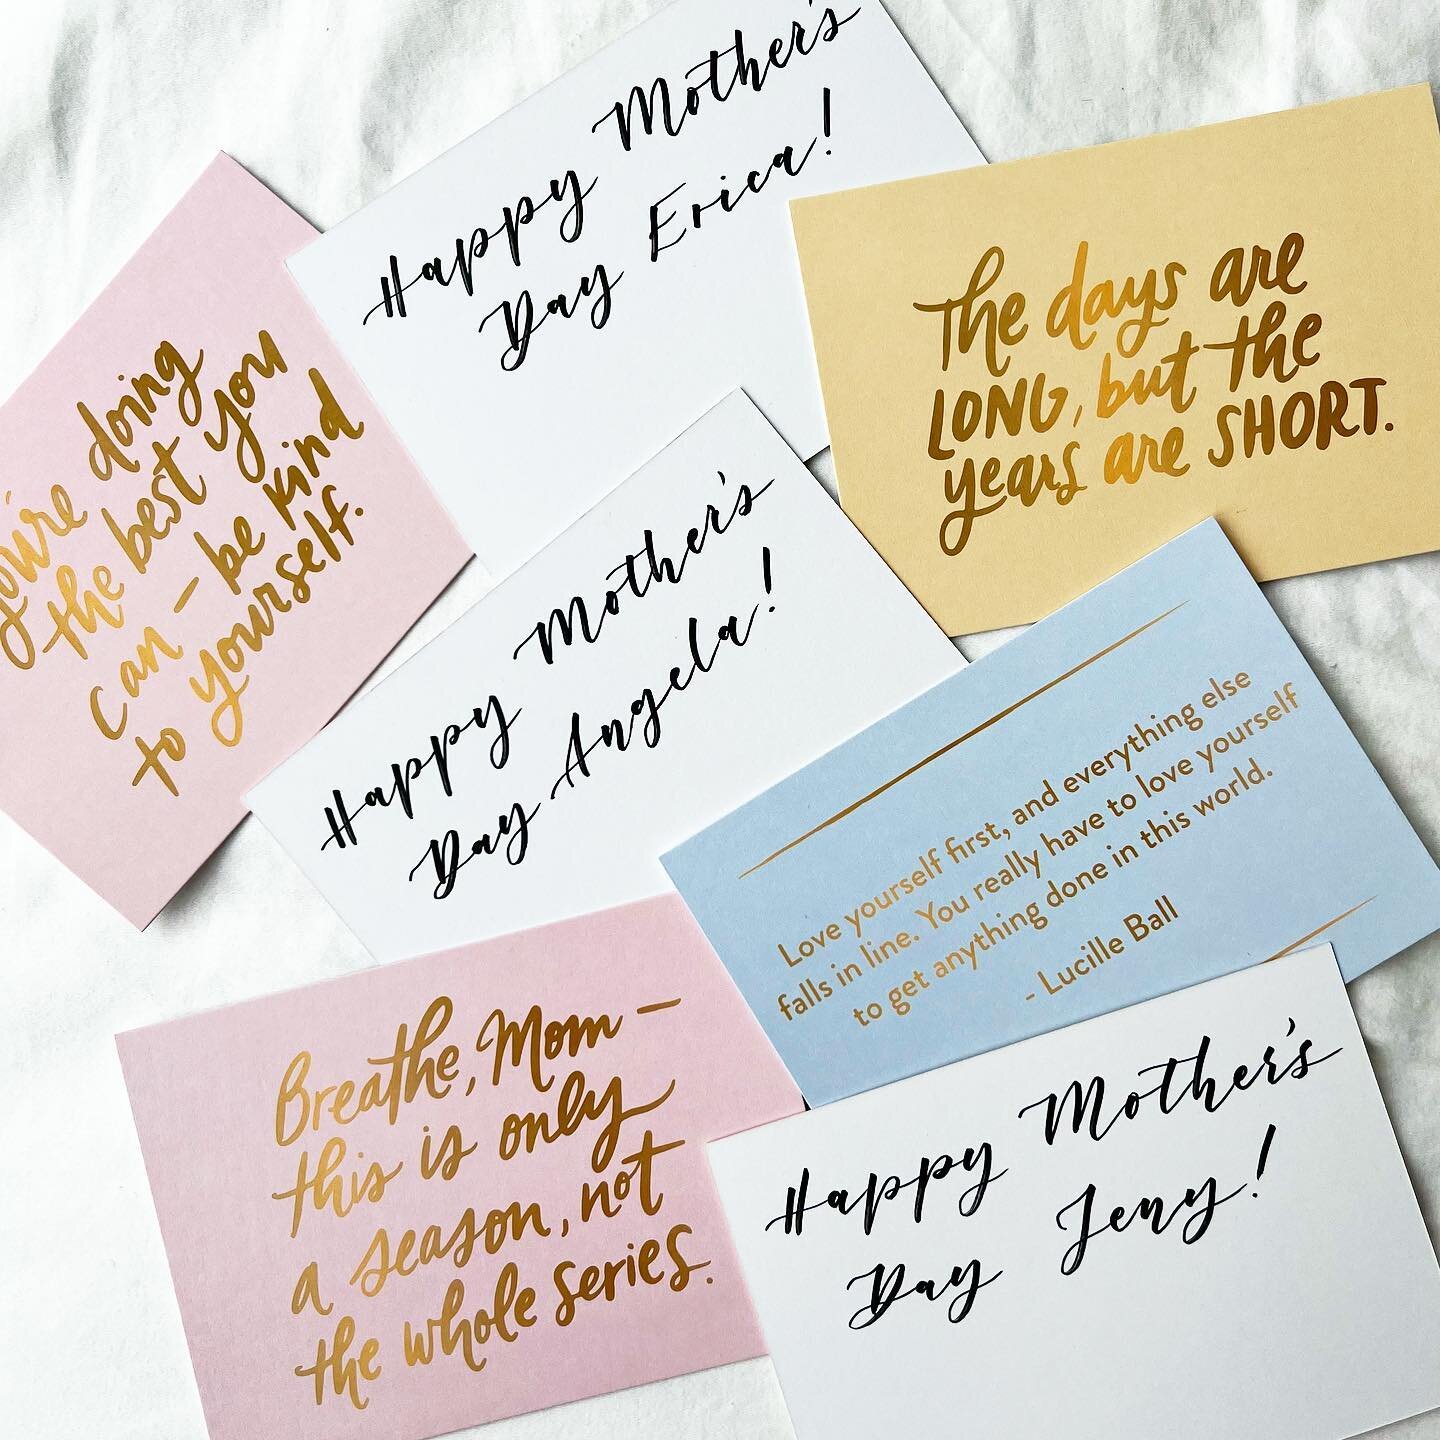 Positive quotes for today! My fave is &ldquo;the days are long but the years are short.&rdquo; Happy Mother&rsquo;s Day to all the wonderful mamas out there, single mamas, single babas, mamas who we&rsquo;ve lost and miss dearly, those who want to be